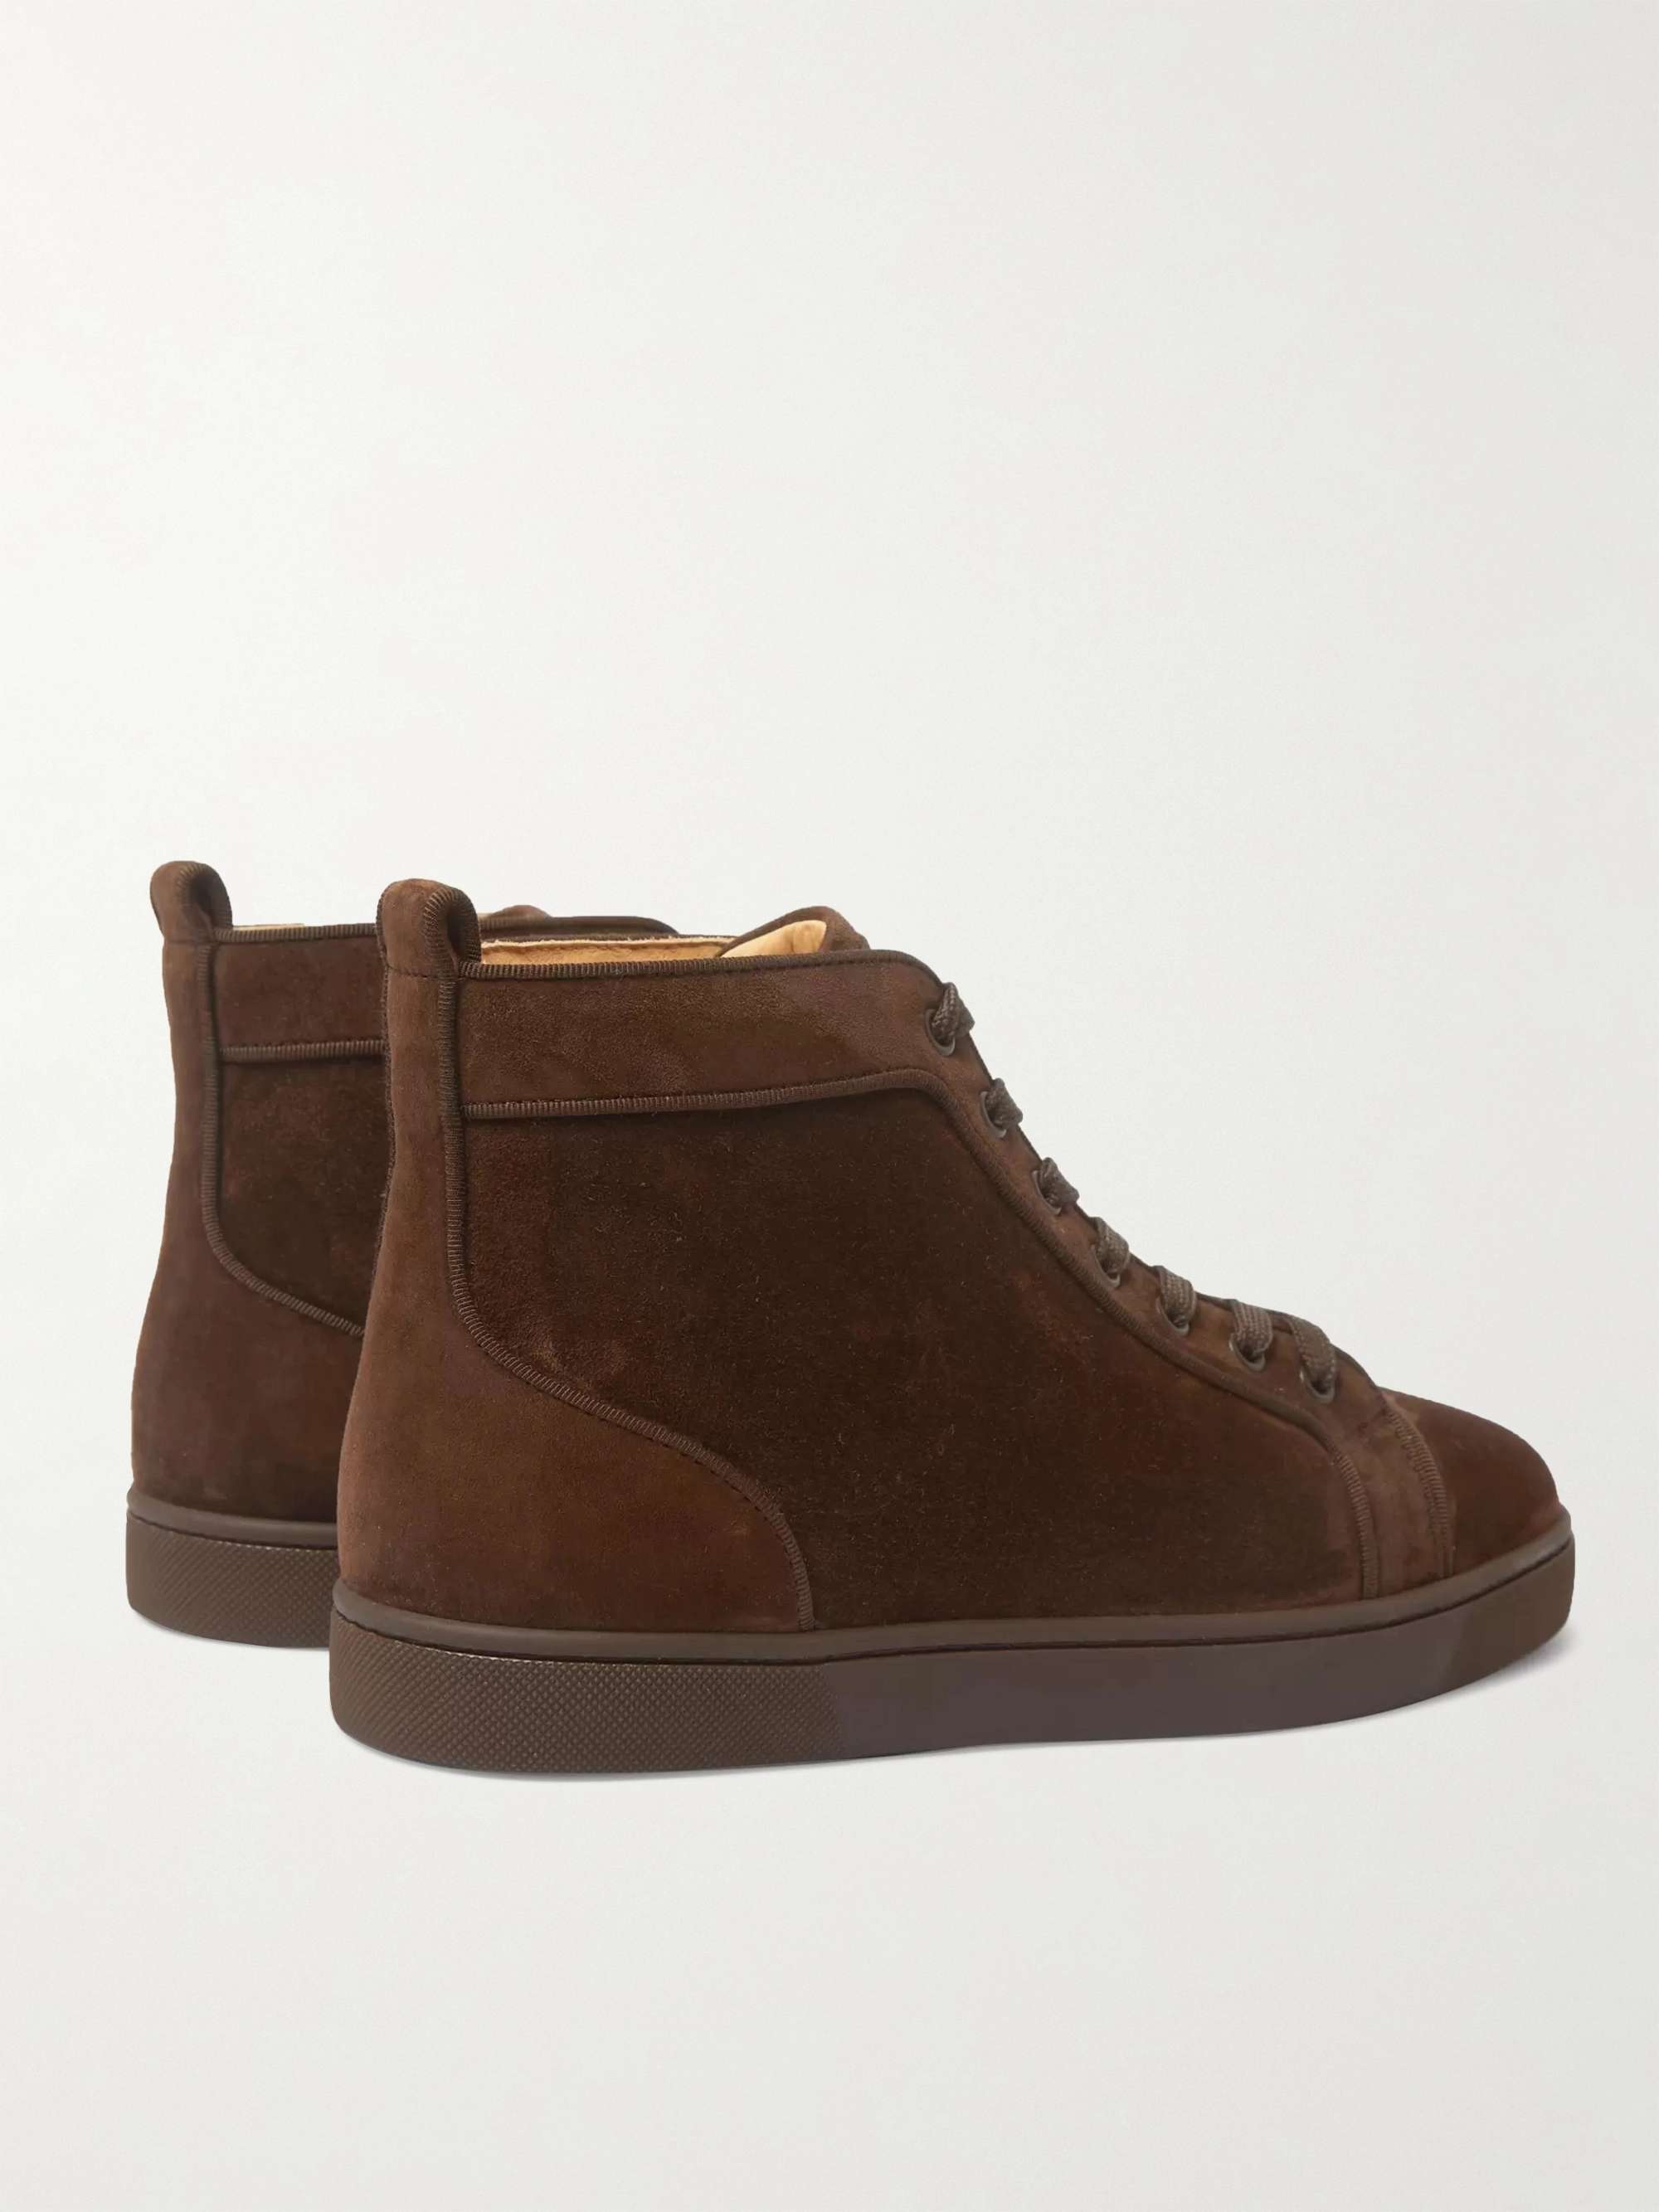 CHRISTIAN LOUBOUTIN Louis Suede High-Top Sneakers for Men | MR PORTER